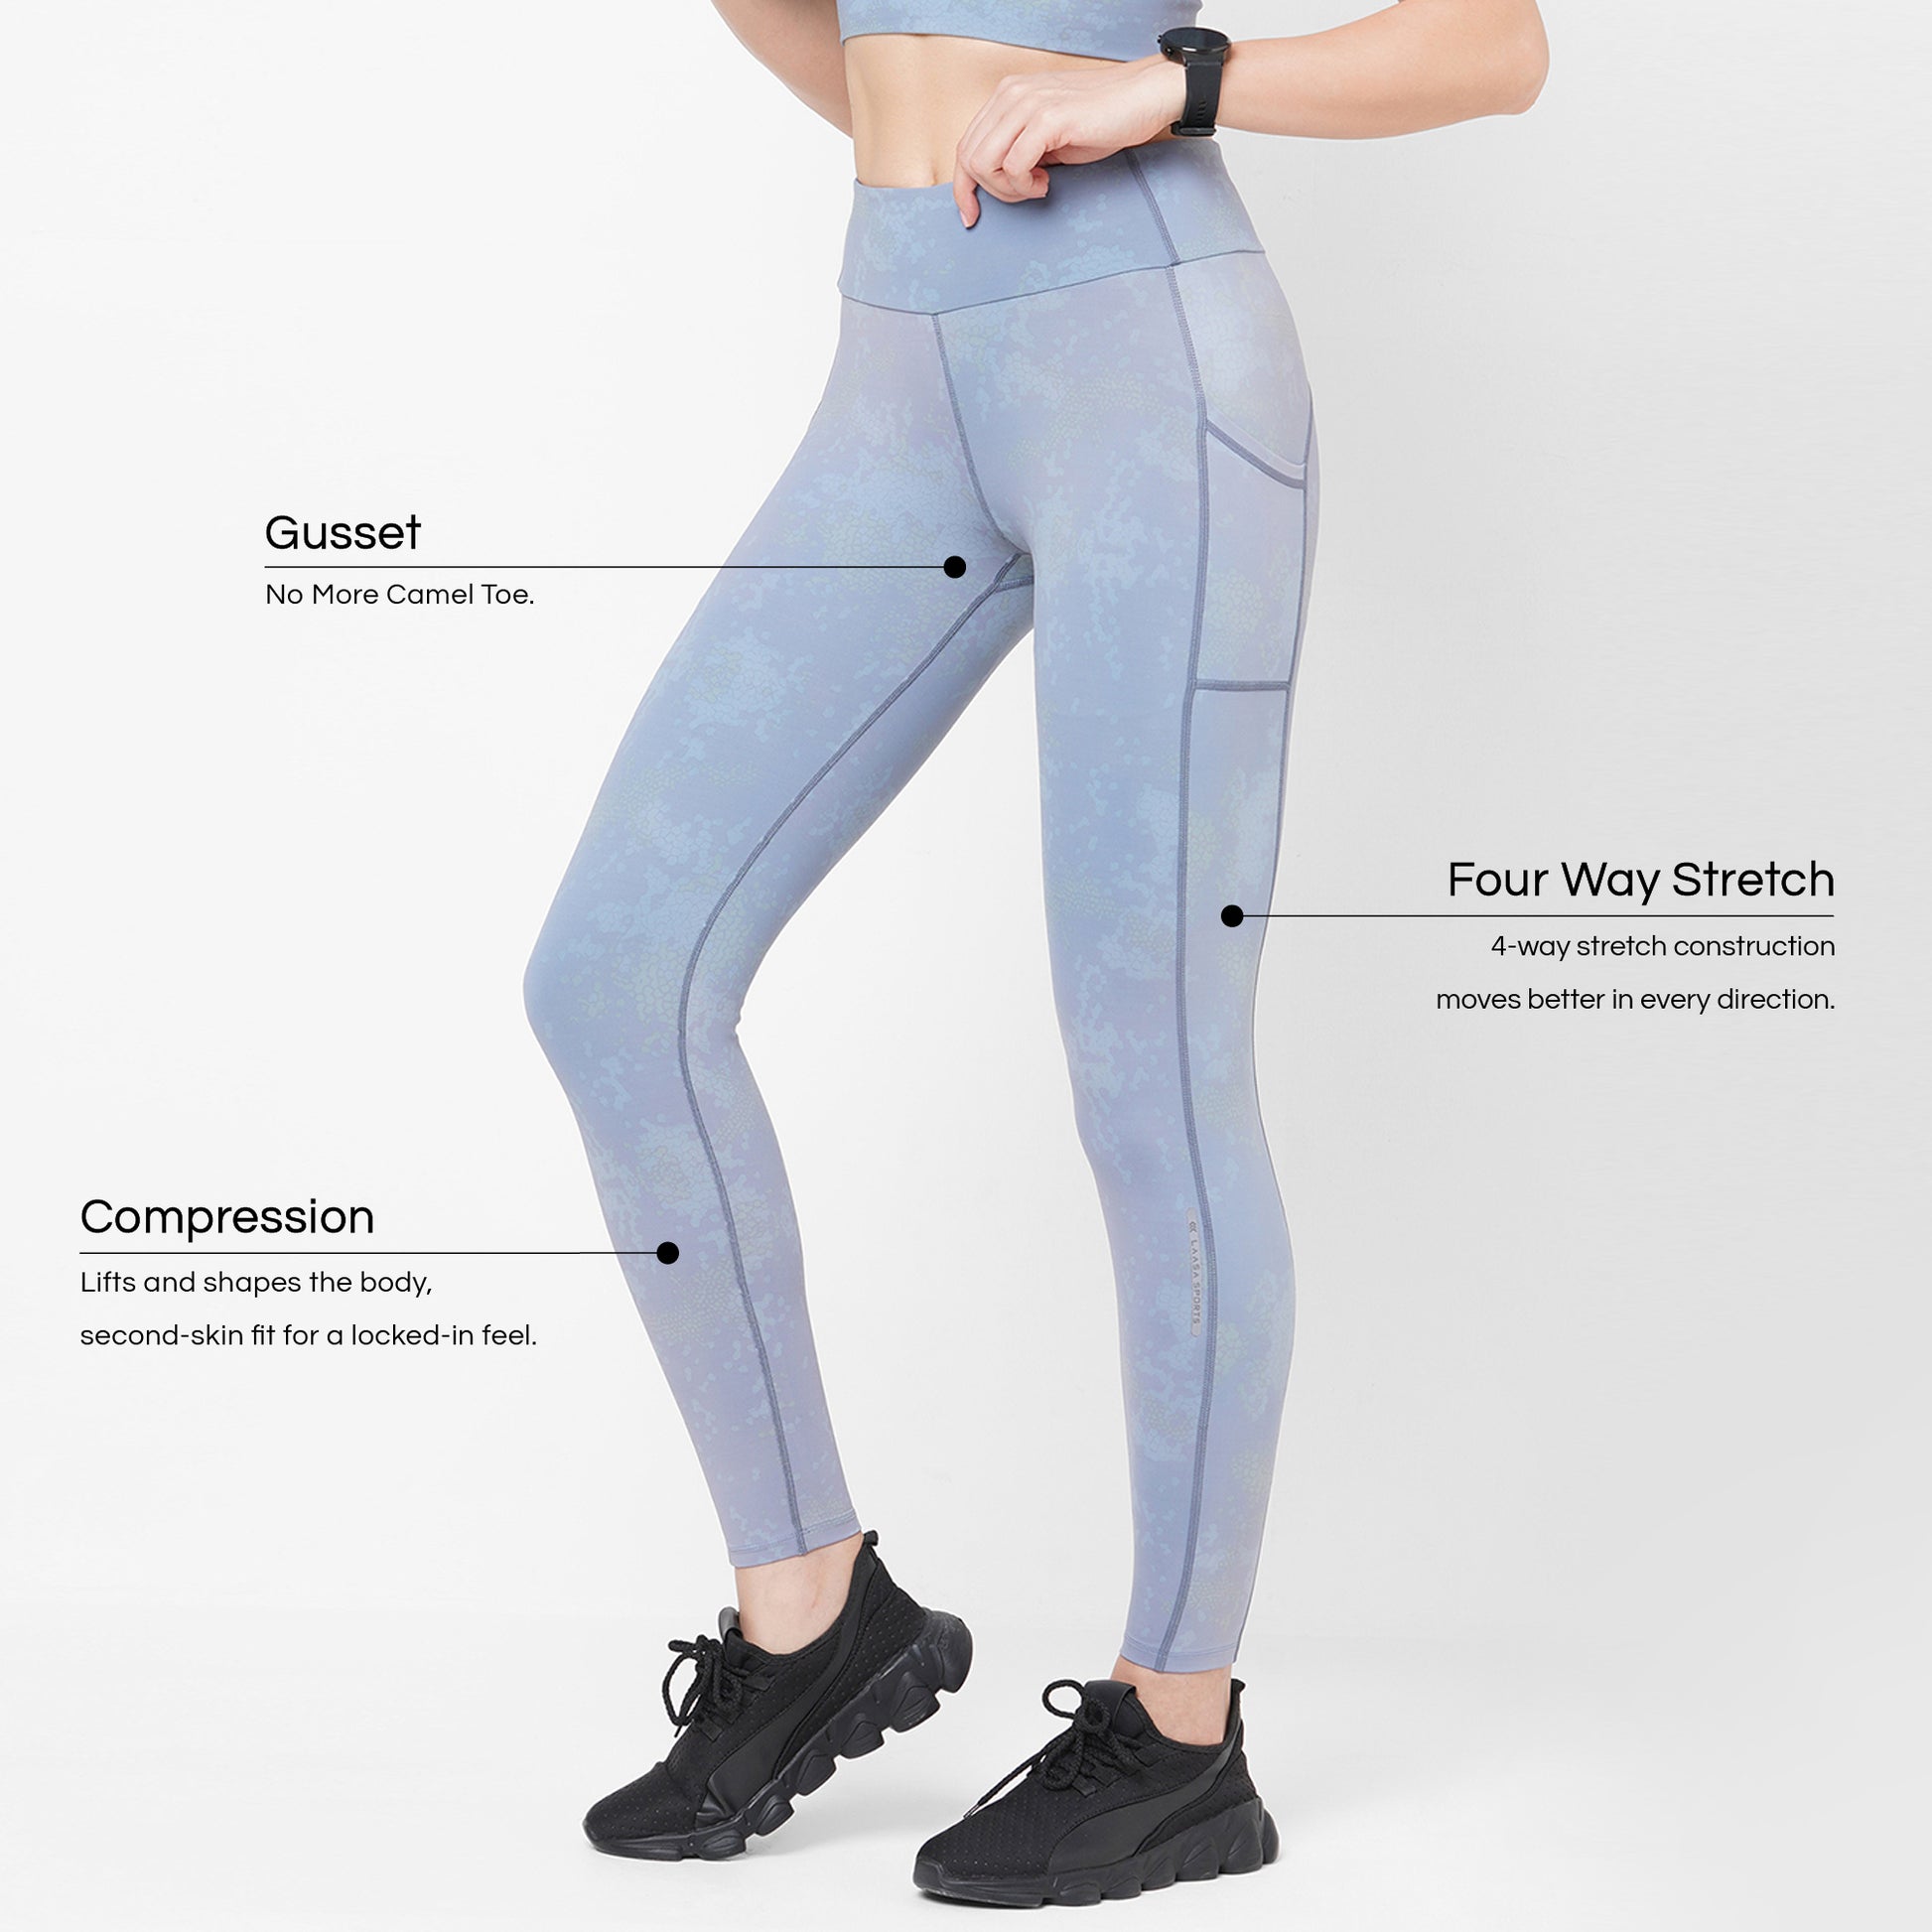 Power 7/8 Compression Tights